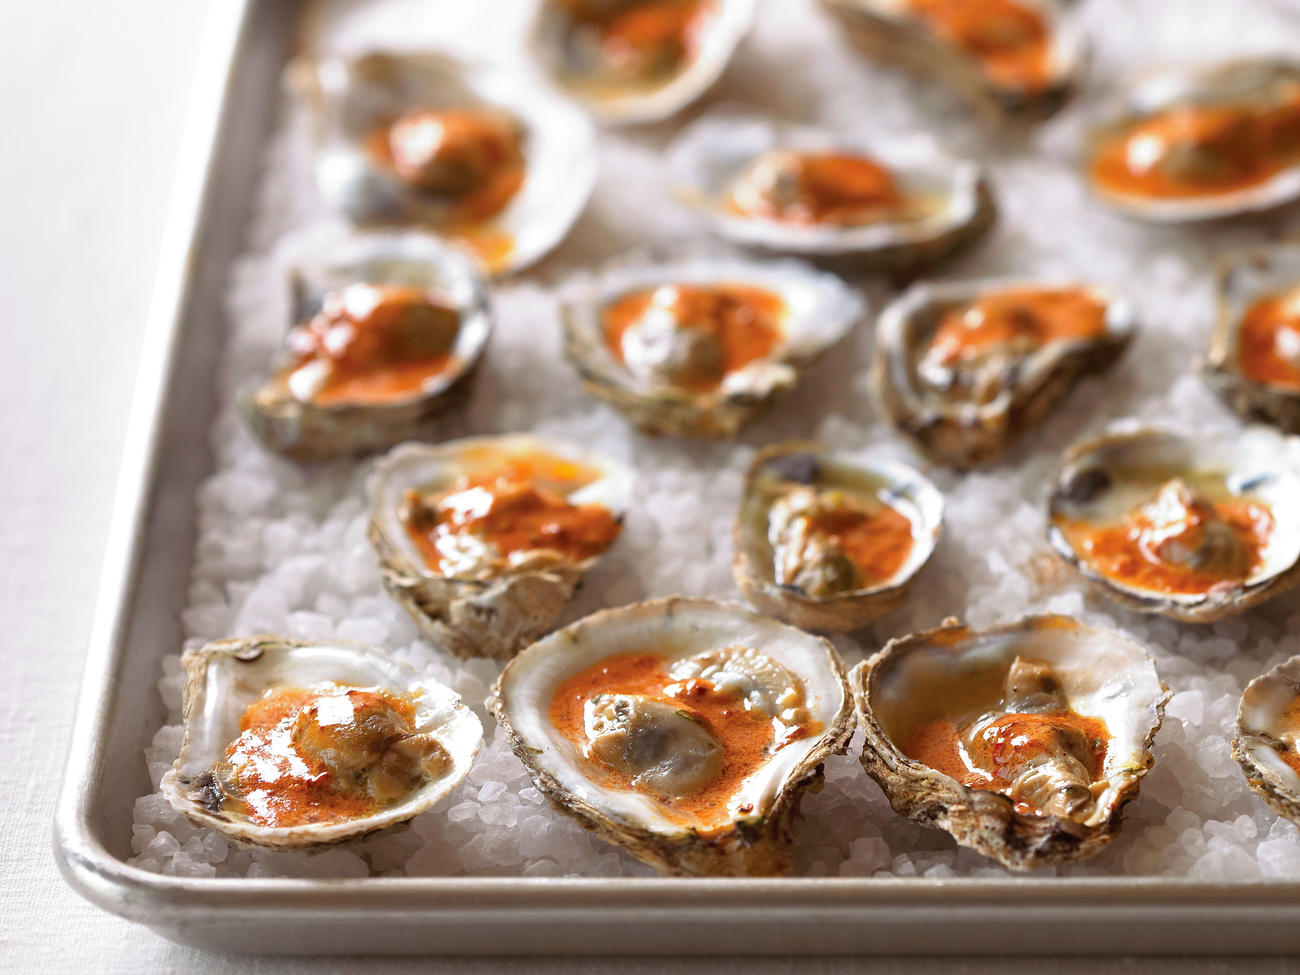 Barbecued Oysters with Chipotle Glaze